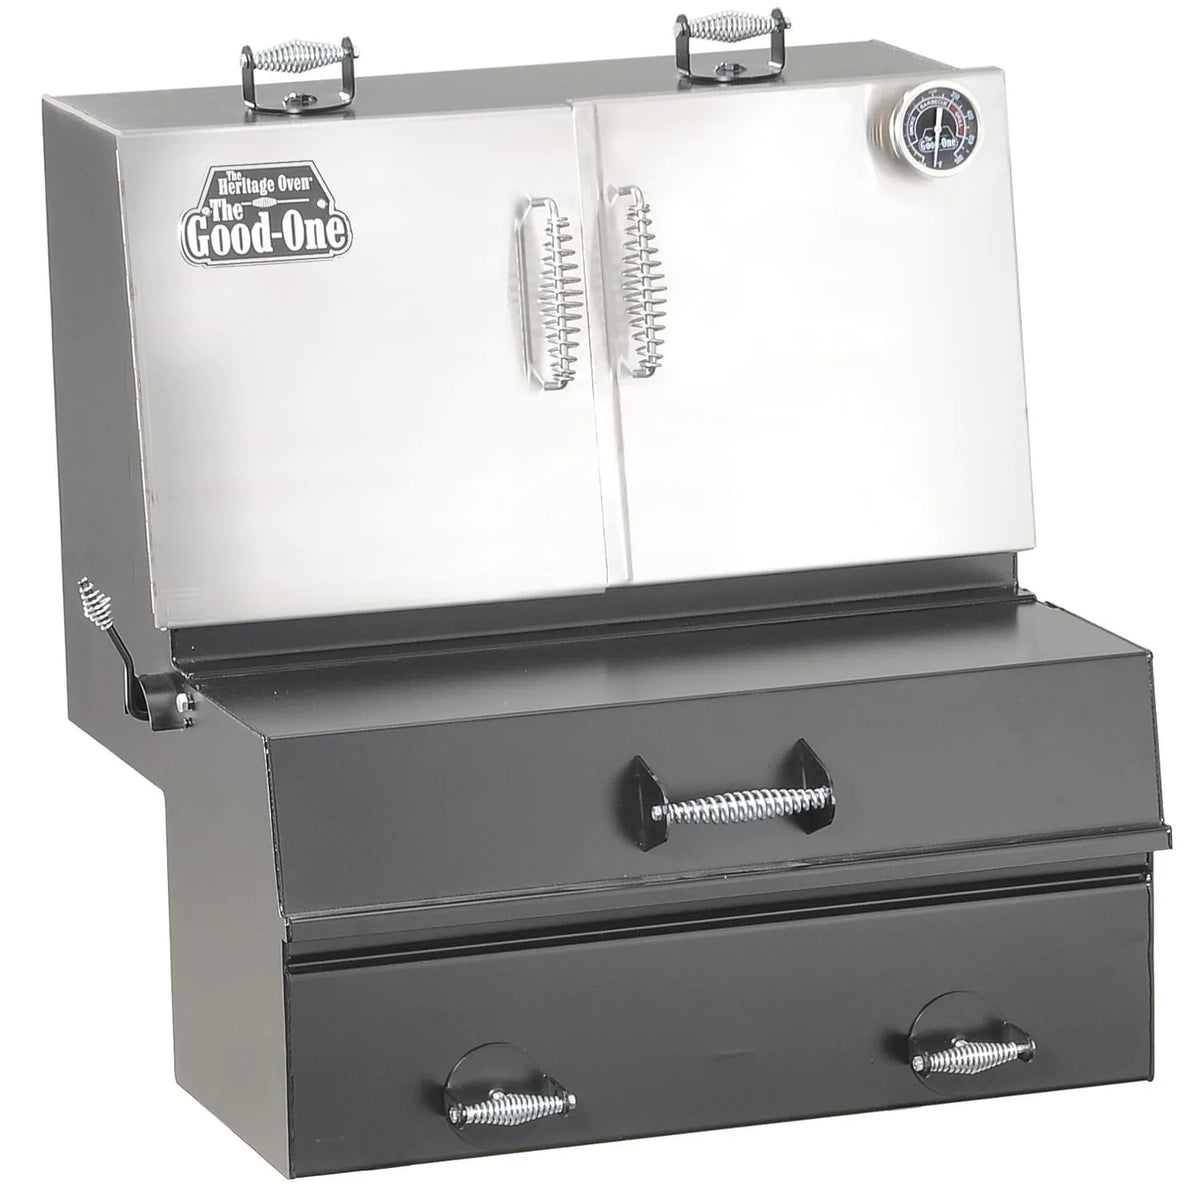 Good-One Manufacturing - 3059702 - Grill Closed